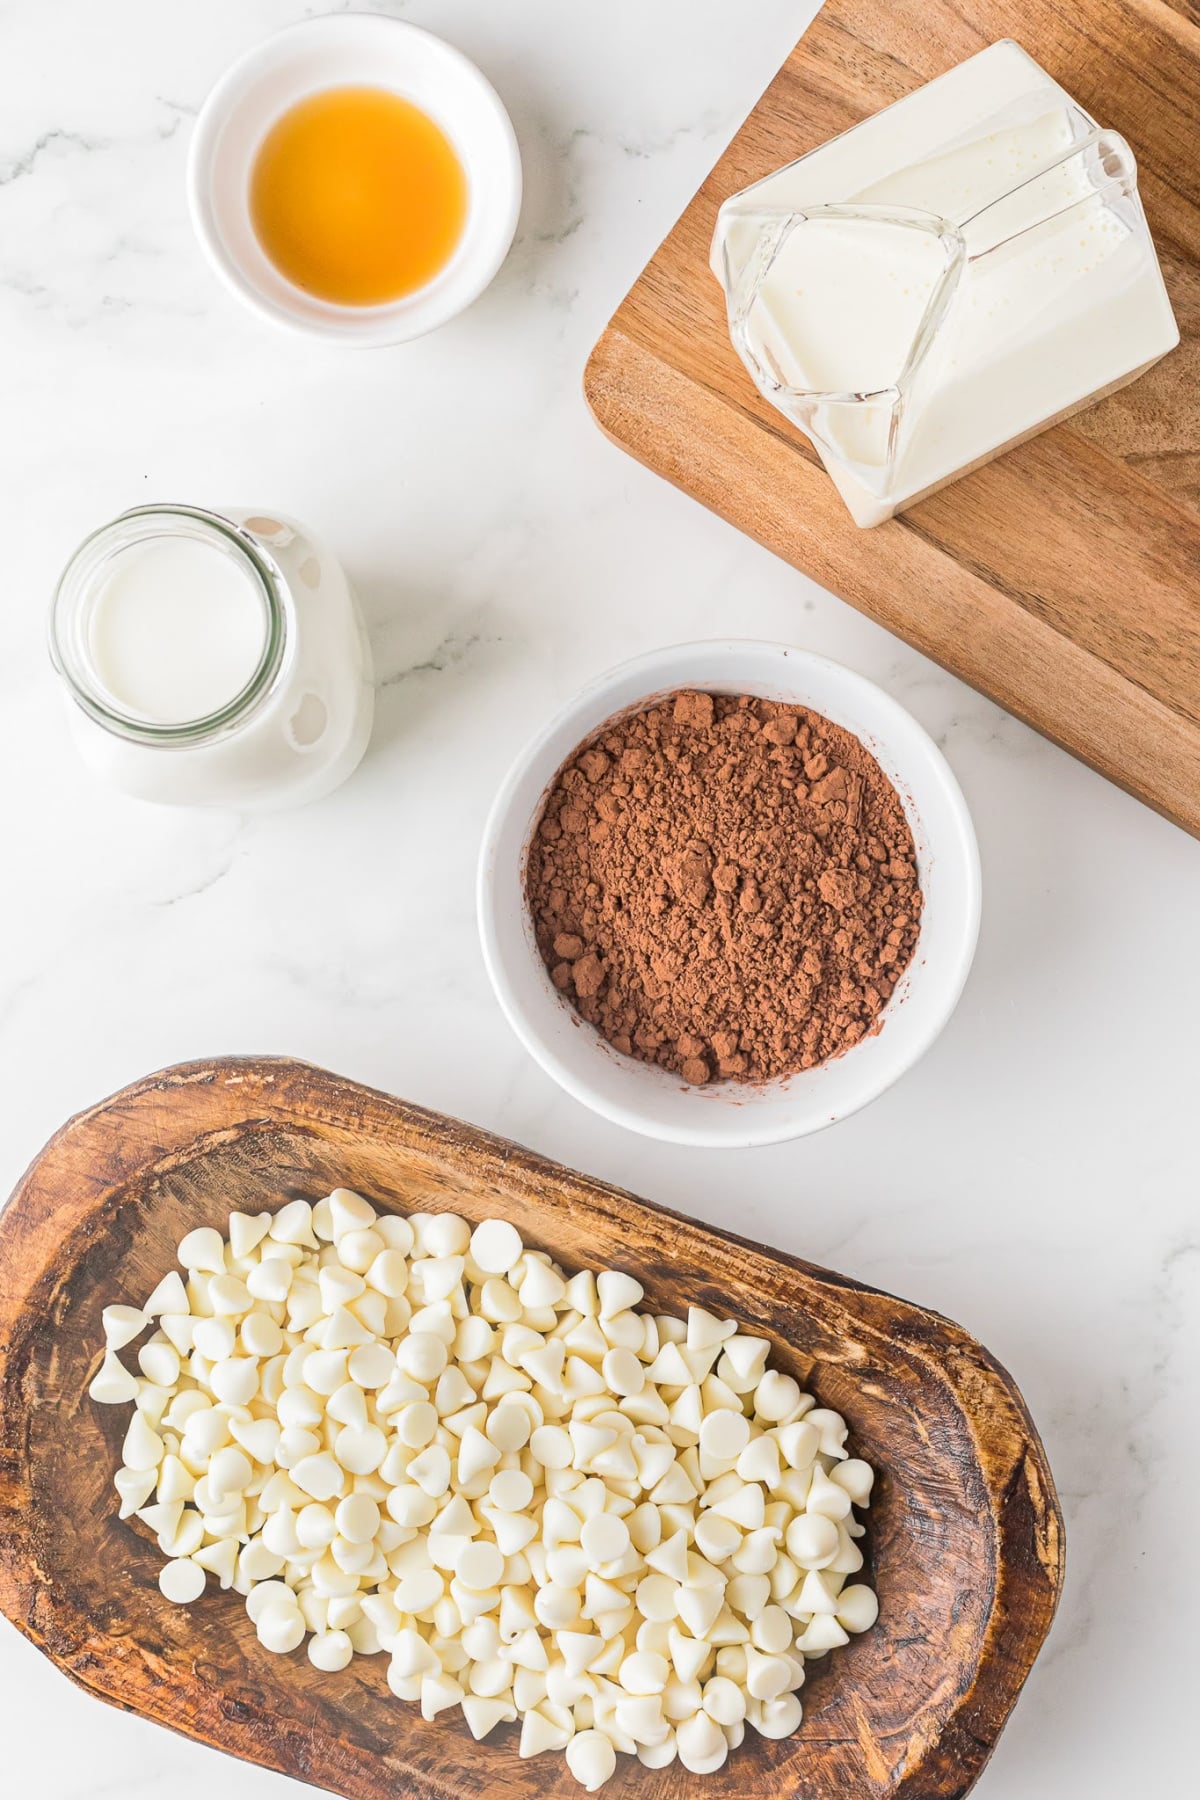 bowl of white chocolate chips, cocoa powder, milk and other ingredients for making hot chocolate